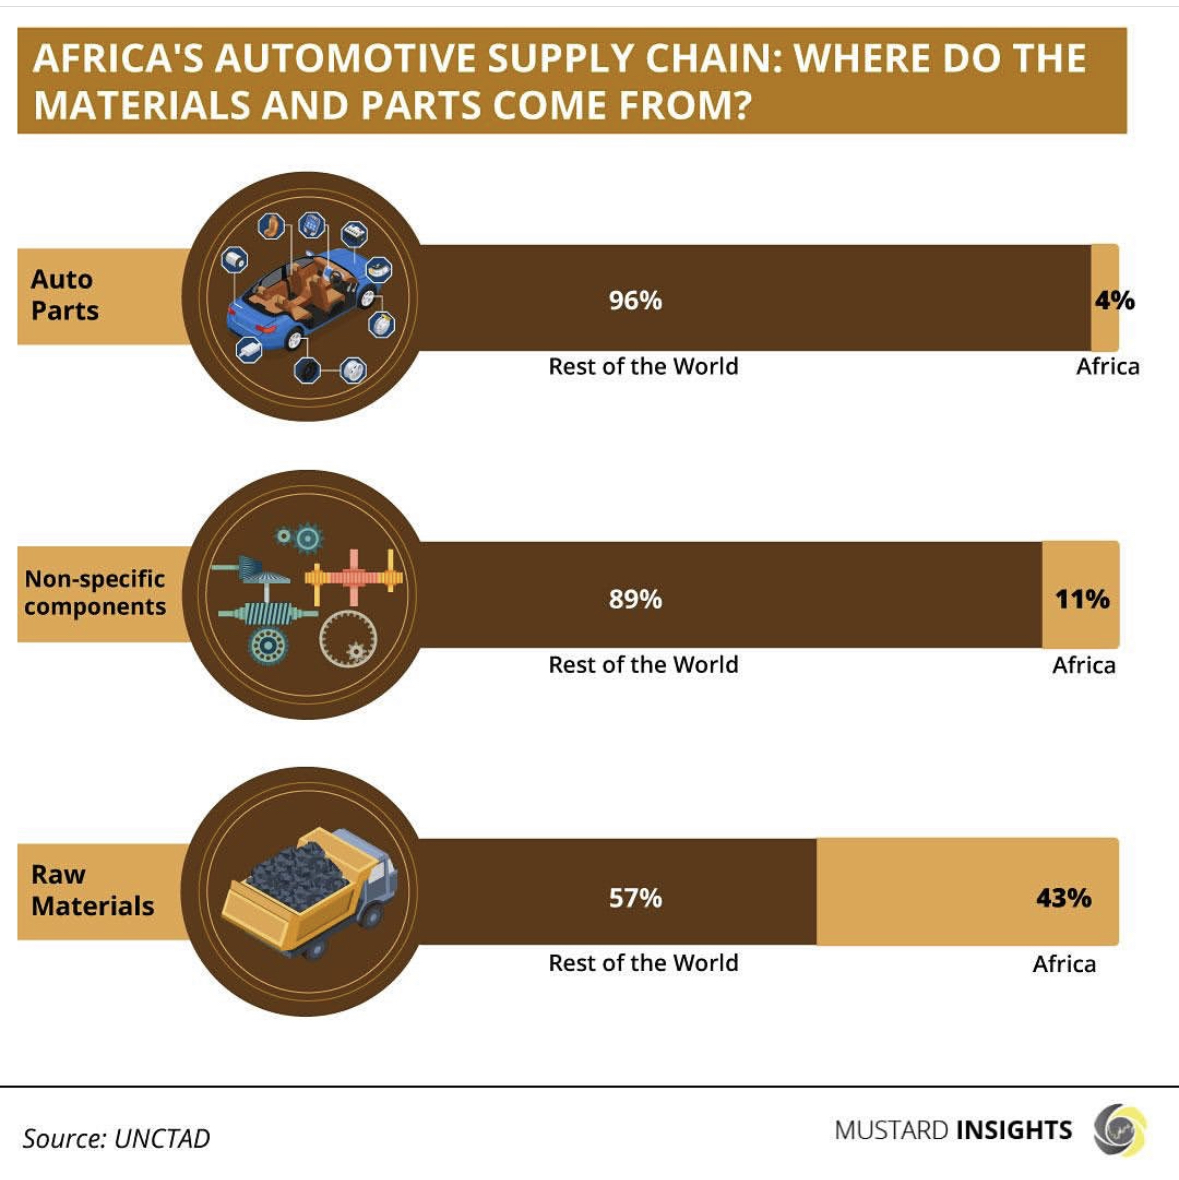 Africa’s Automotive Supply Chain: Where Do The Materials And Parts Come From?